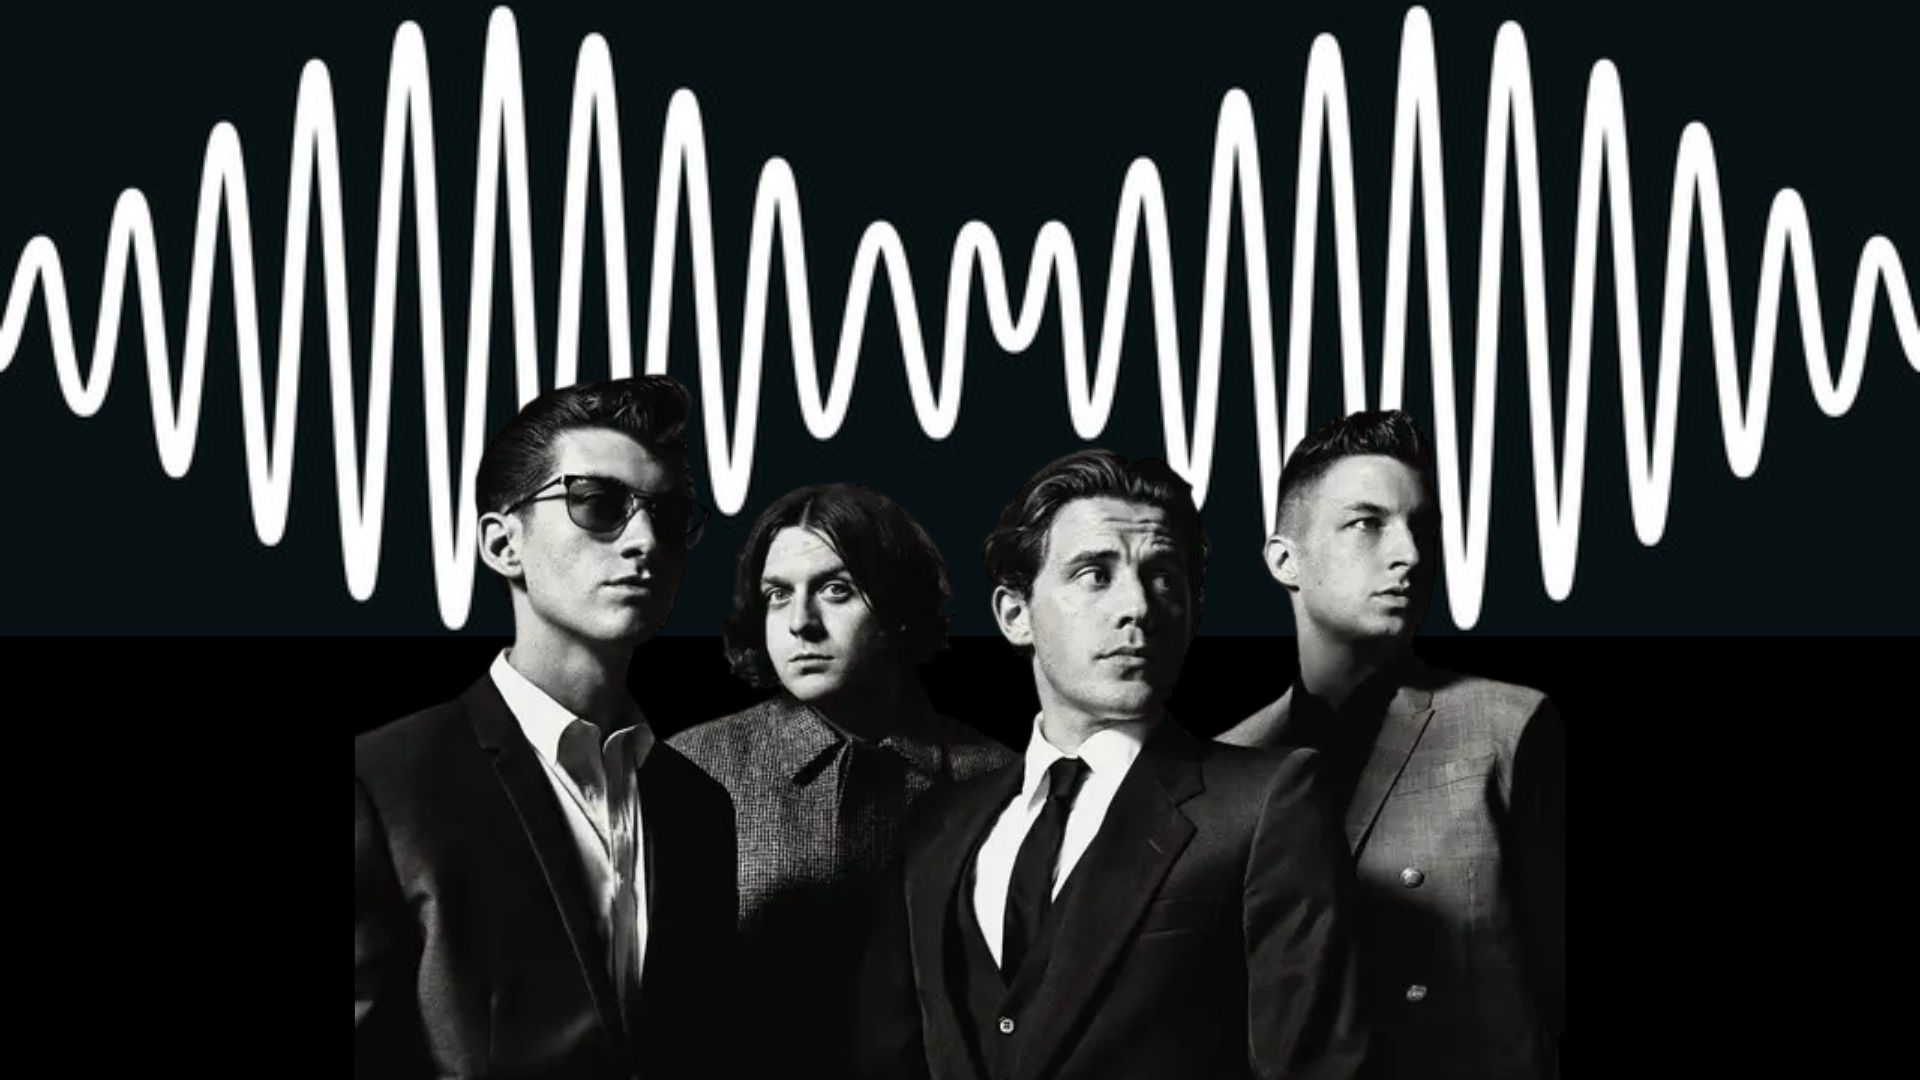 Arctic Monkey’s ‘Do I Wanna Know’ was released 10 years ago ...